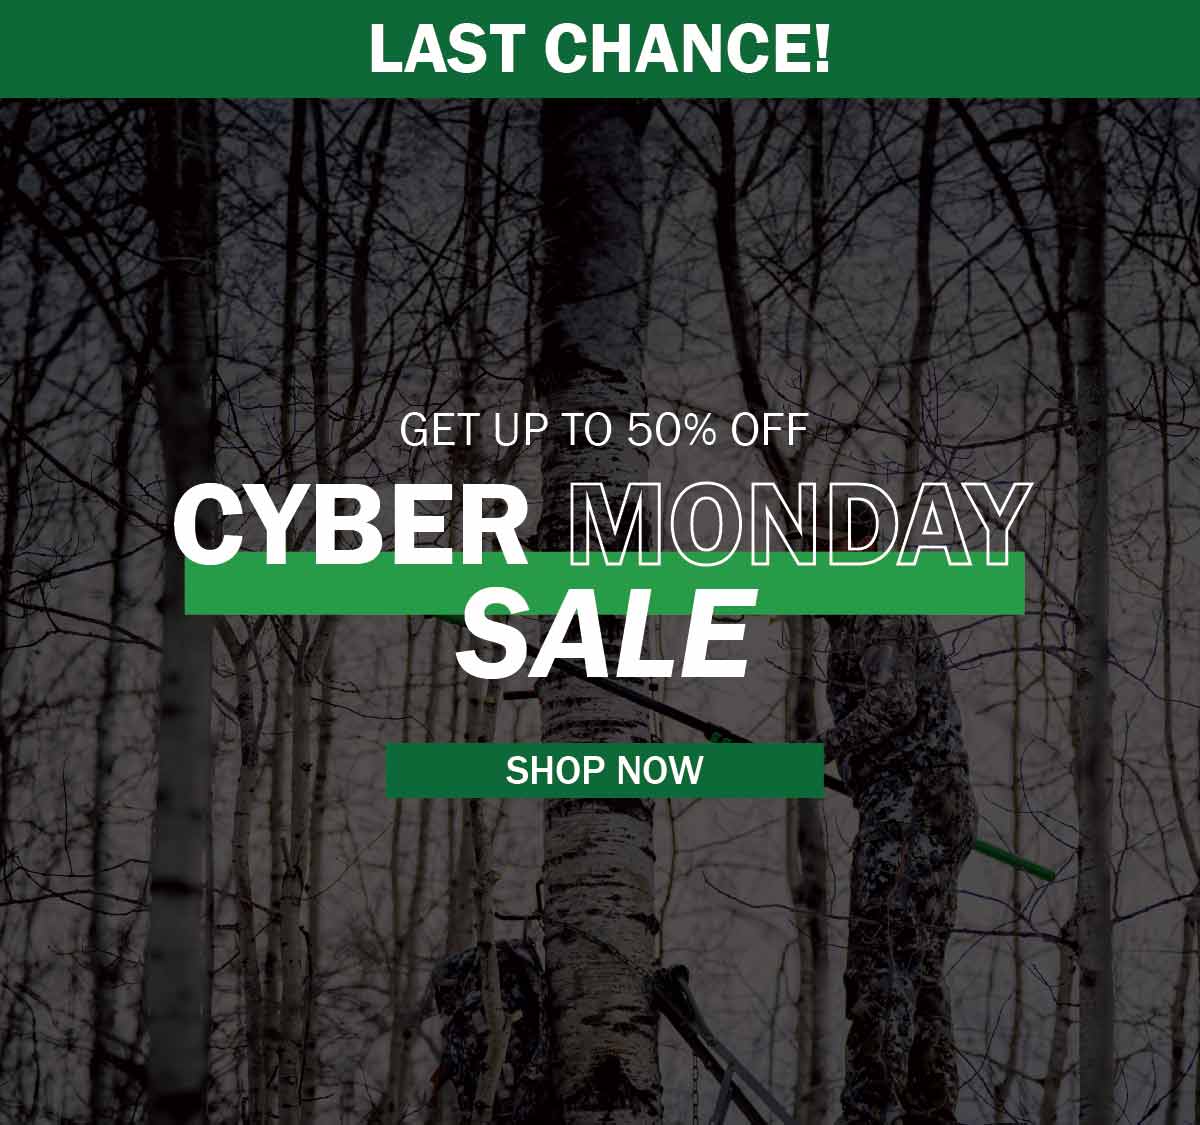 Last Chance To Save!